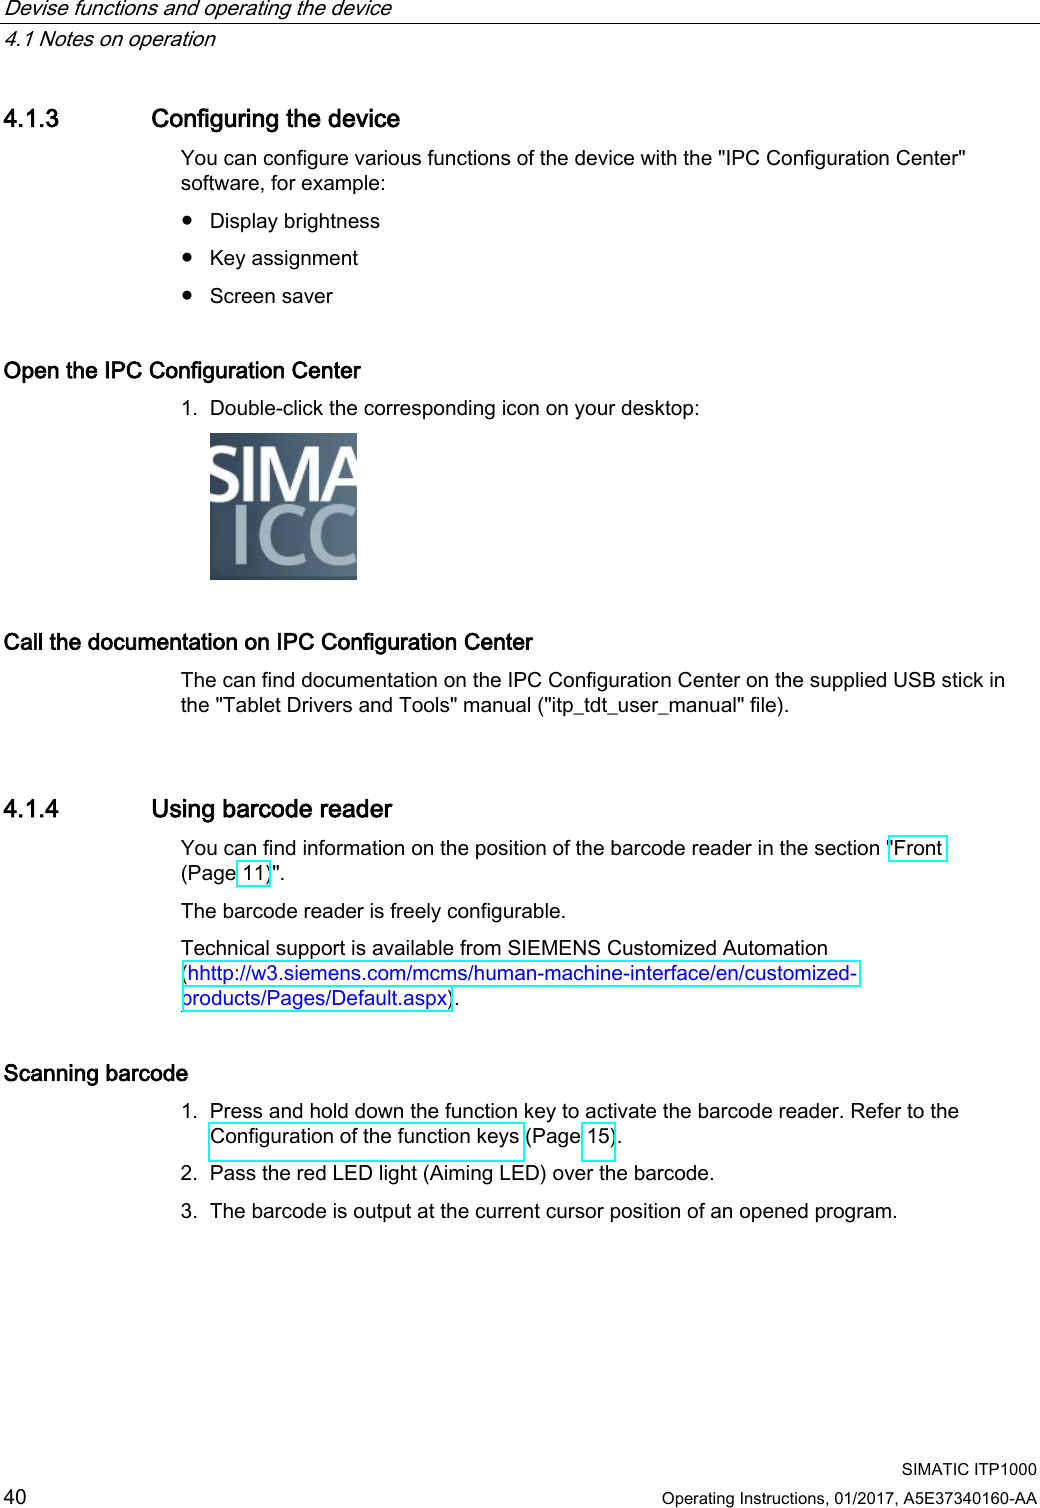 Devise functions and operating the device   4.1 Notes on operation   SIMATIC ITP1000 40  Operating Instructions, 01/2017, A5E37340160-AA  4.1.3 Configuring the device You can configure various functions of the device with the &quot;IPC Configuration Center&quot; software, for example: ● Display brightness ● Key assignment ● Screen saver Open the IPC Configuration Center 1. Double-click the corresponding icon on your desktop:  Call the documentation on IPC Configuration Center The can find documentation on the IPC Configuration Center on the supplied USB stick in the &quot;Tablet Drivers and Tools&quot; manual (&quot;itp_tdt_user_manual&quot; file).  4.1.4 Using barcode reader You can find information on the position of the barcode reader in the section &quot;Front (Page 11)&quot;. The barcode reader is freely configurable. Technical support is available from SIEMENS Customized Automation (hhttp://w3.siemens.com/mcms/human-machine-interface/en/customized-products/Pages/Default.aspx). Scanning barcode 1. Press and hold down the function key to activate the barcode reader. Refer to the Configuration of the function keys (Page 15). 2. Pass the red LED light (Aiming LED) over the barcode. 3. The barcode is output at the current cursor position of an opened program. 